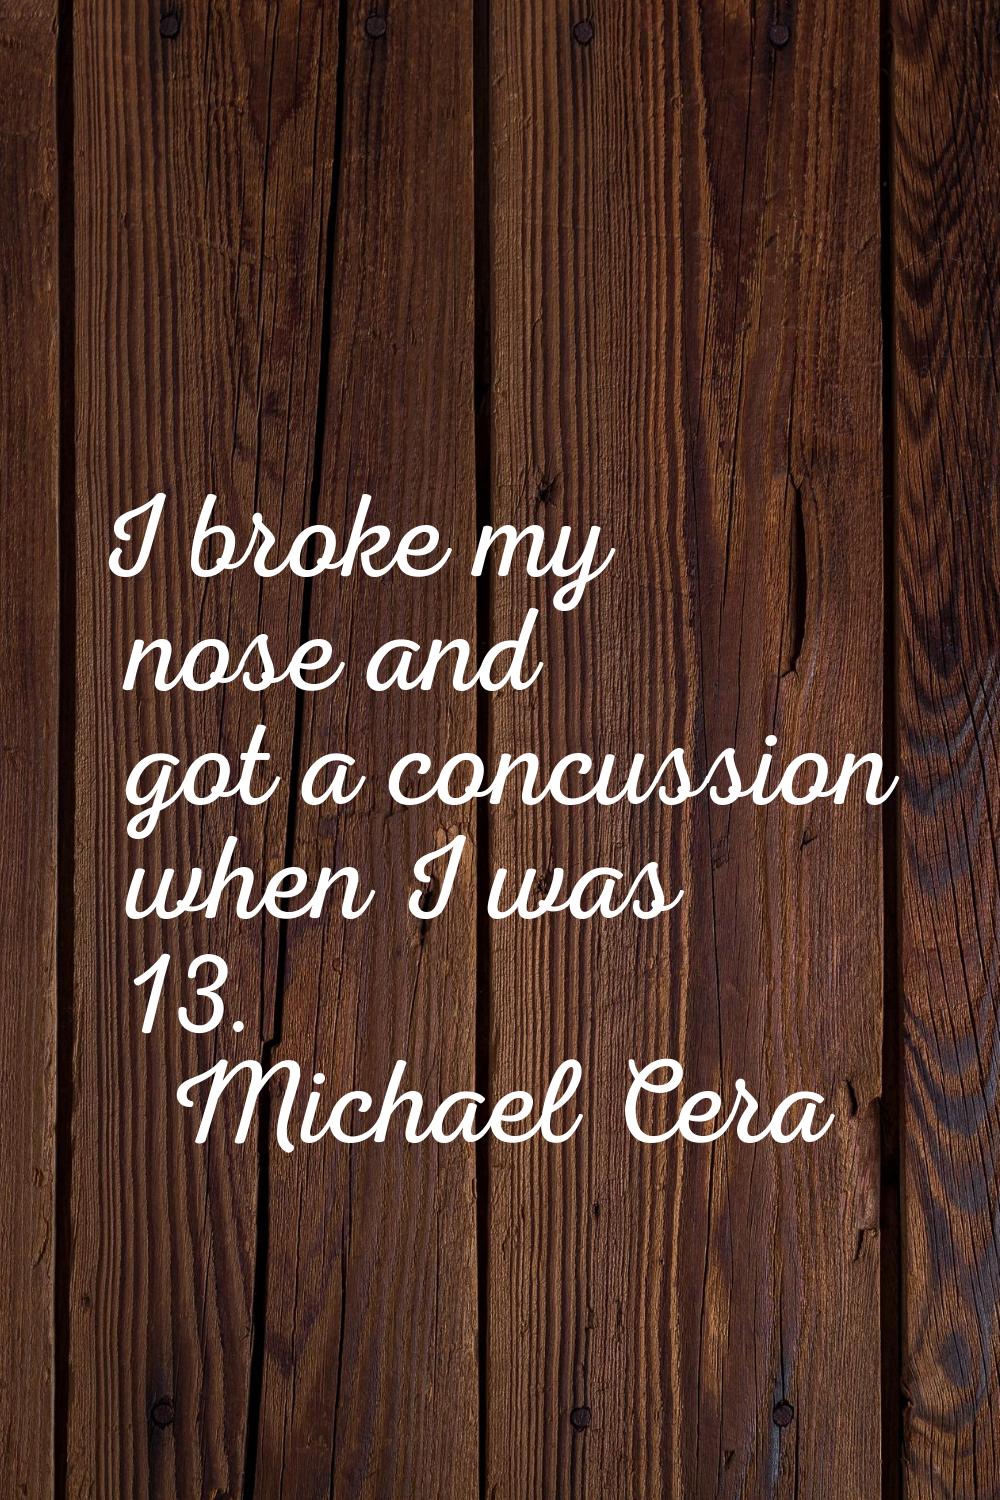 I broke my nose and got a concussion when I was 13.